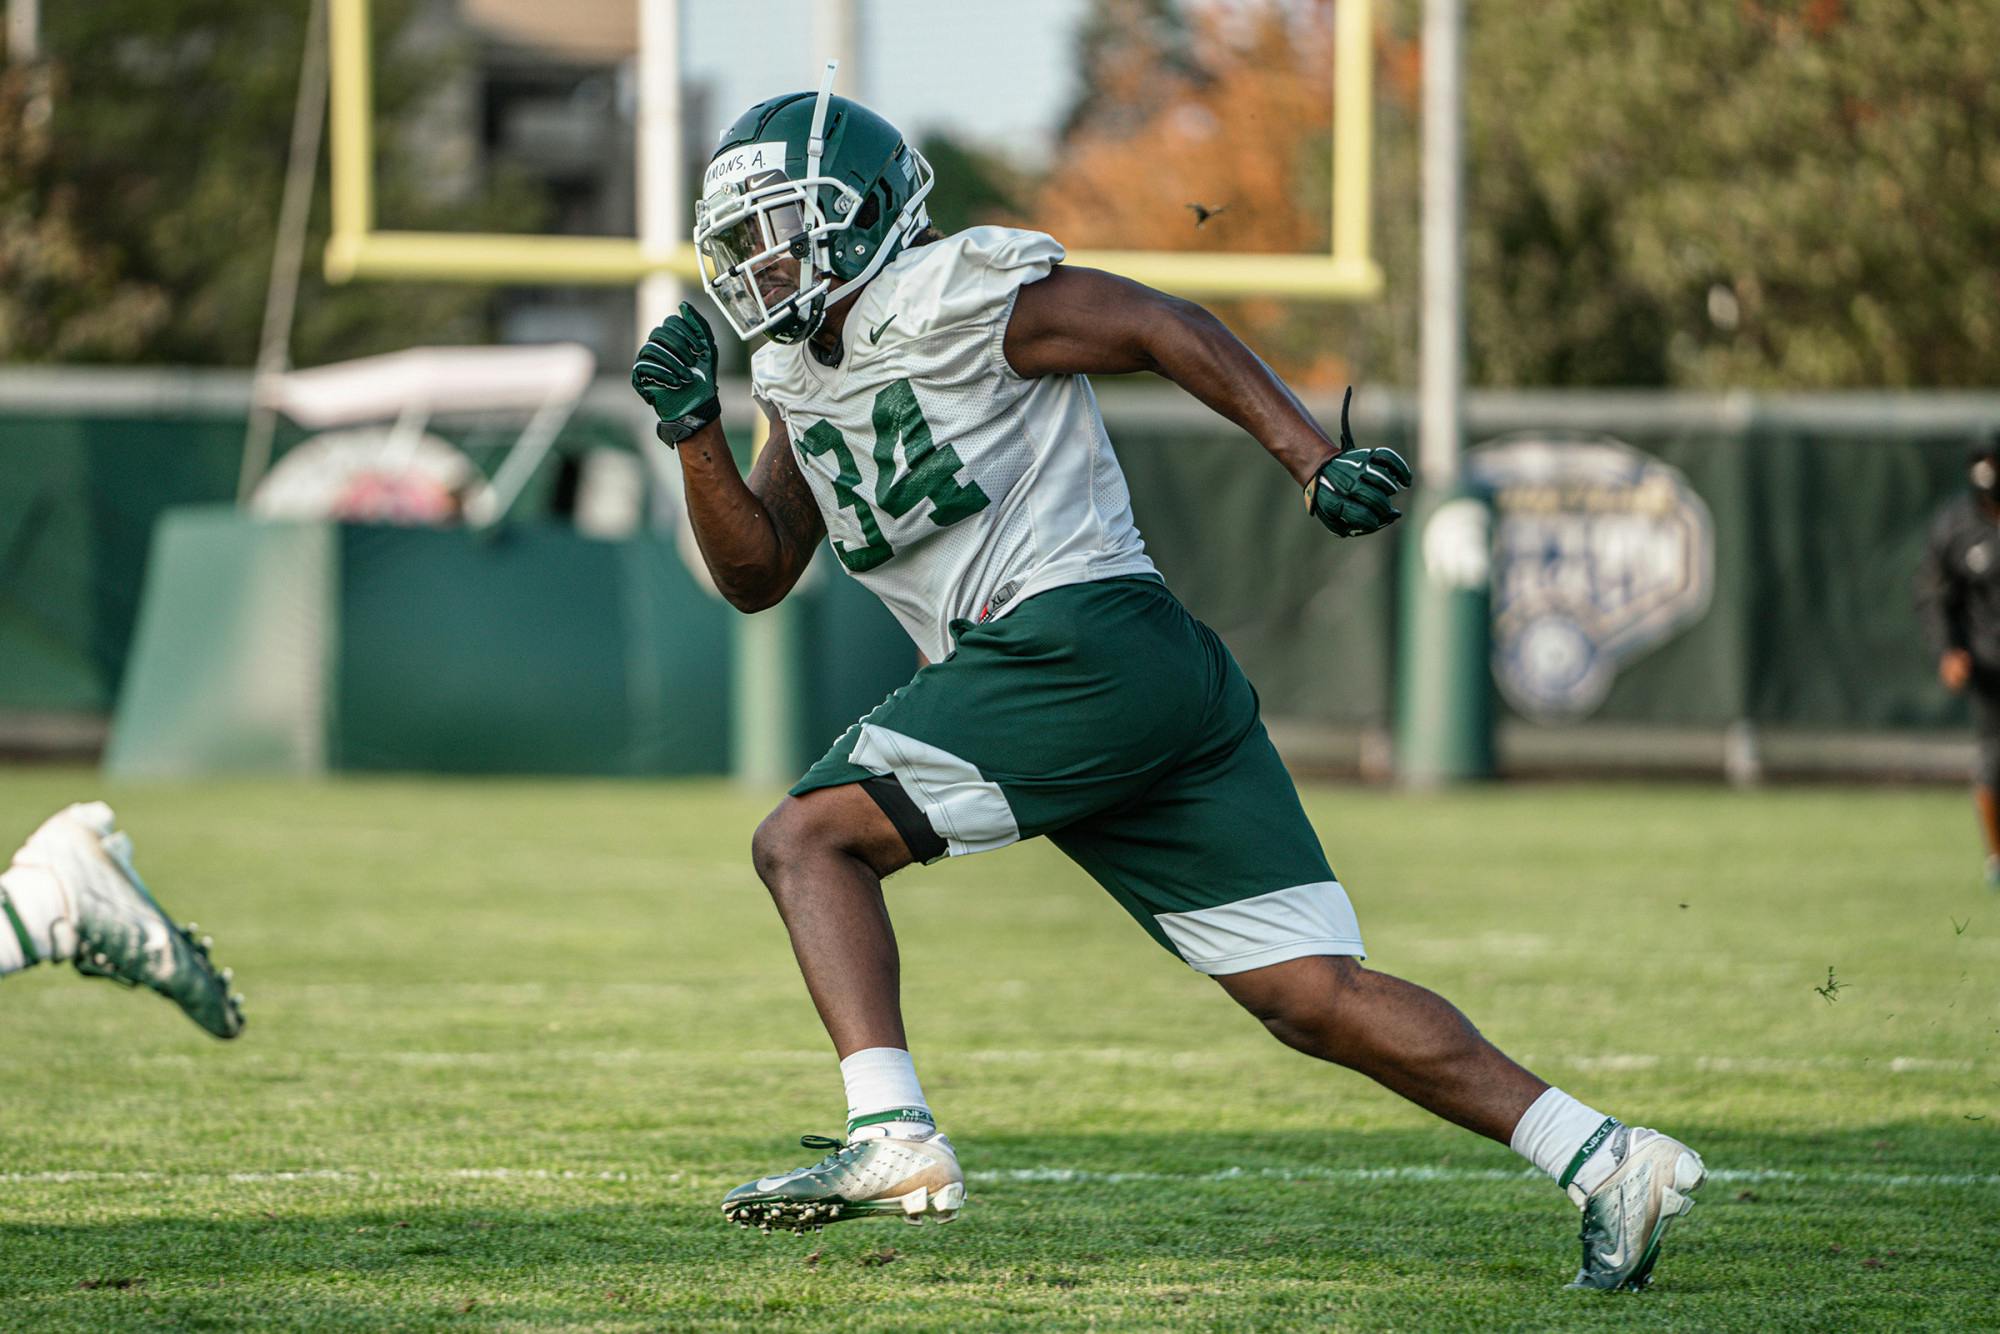 <p>Senior linebacker Antjuan Simmons at practice Sept. 21, 2020. Photo courtesy of Michigan State Athletic Communications.</p>